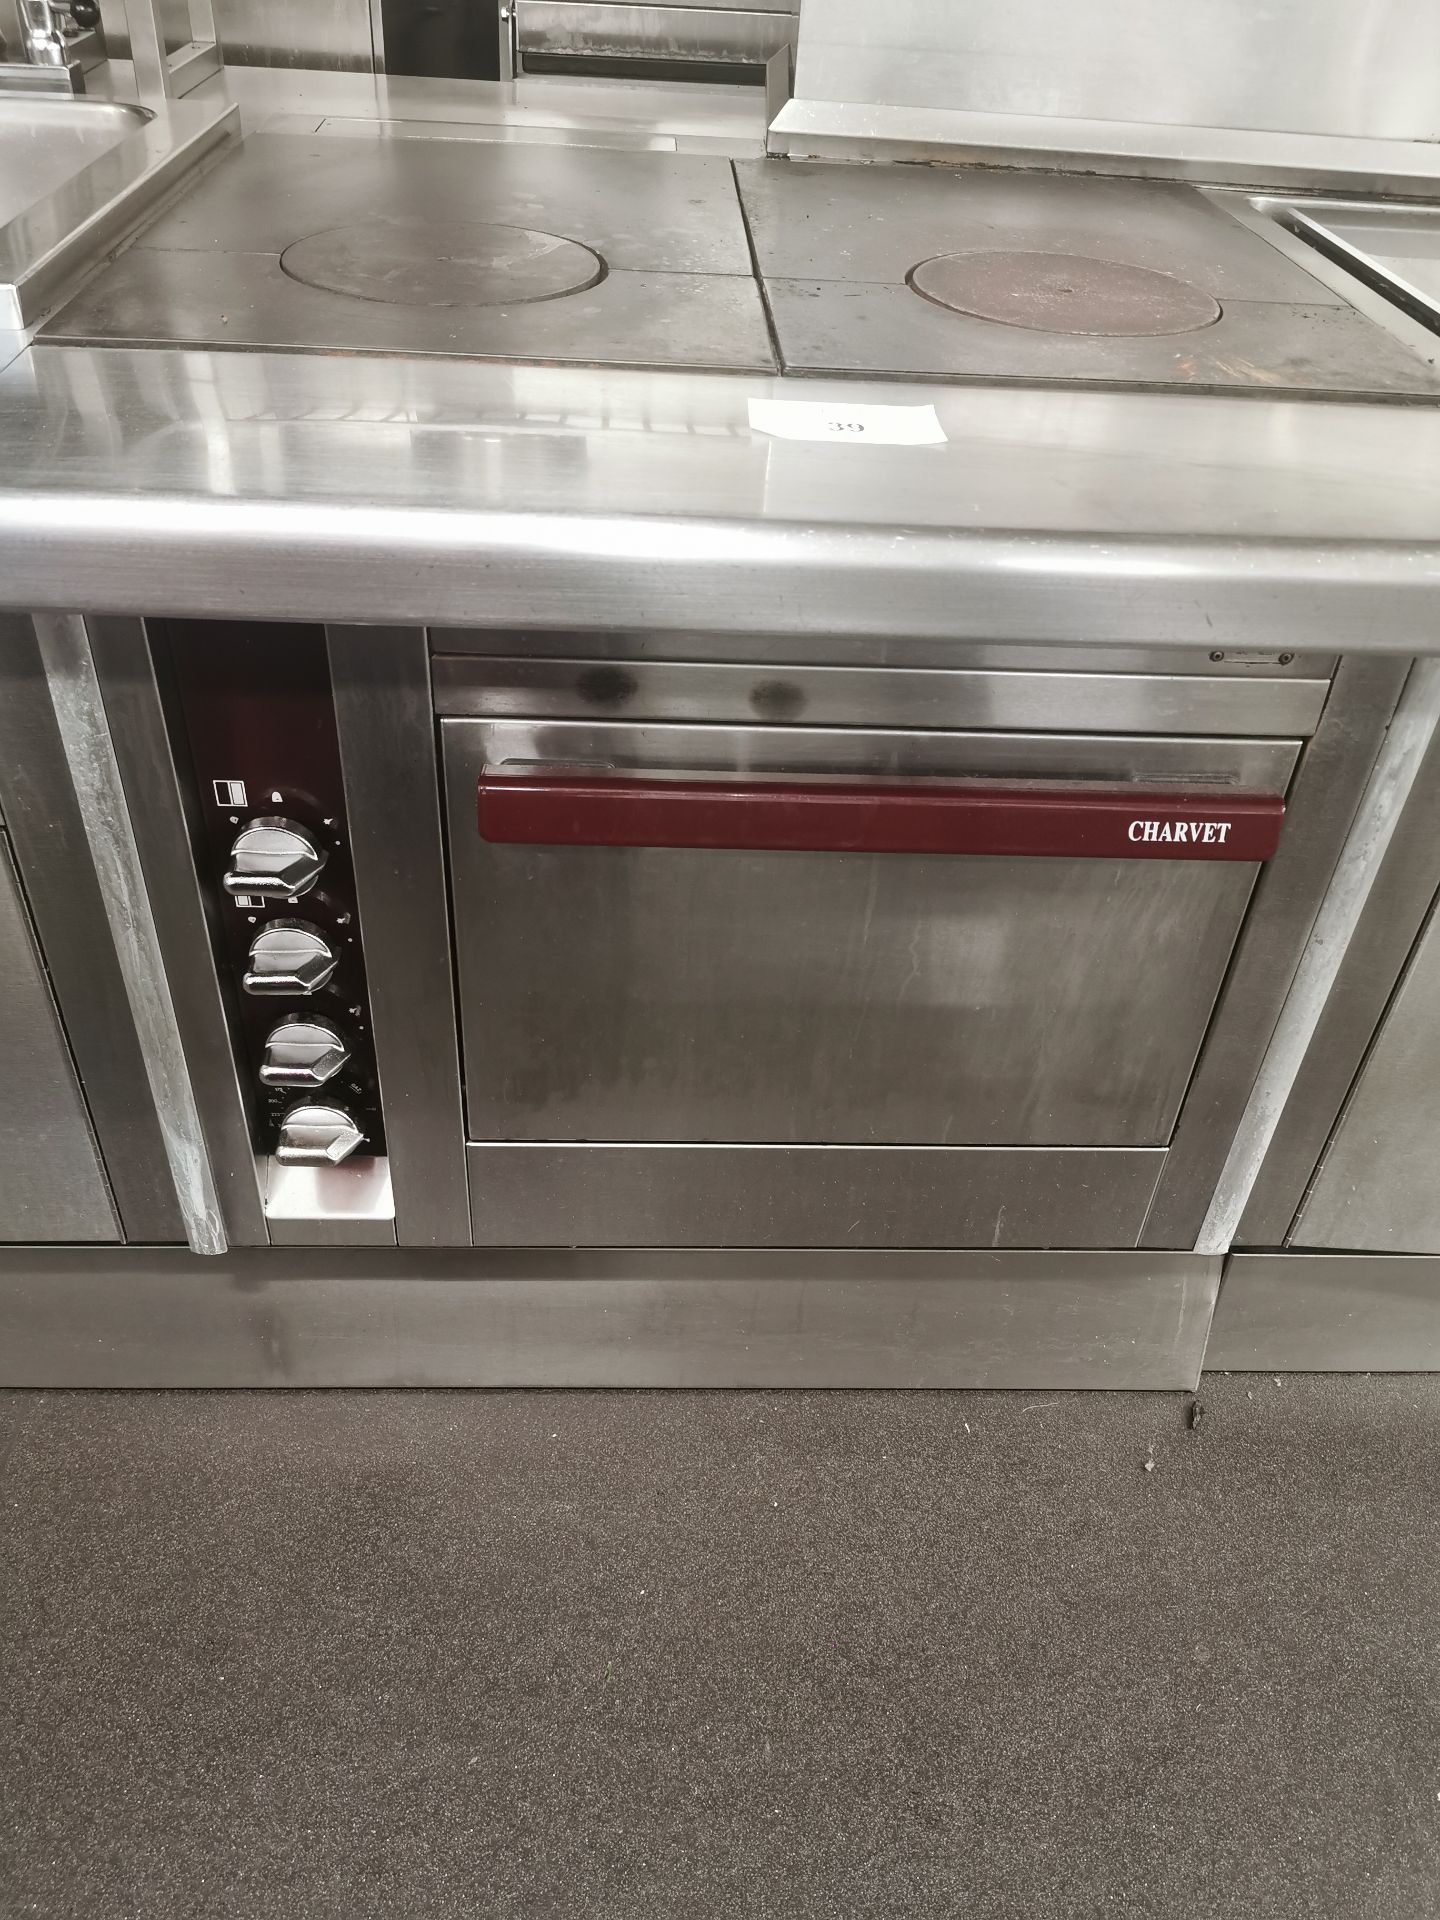 Charvet pro series twin hot plates and oven W85cm - Image 2 of 4